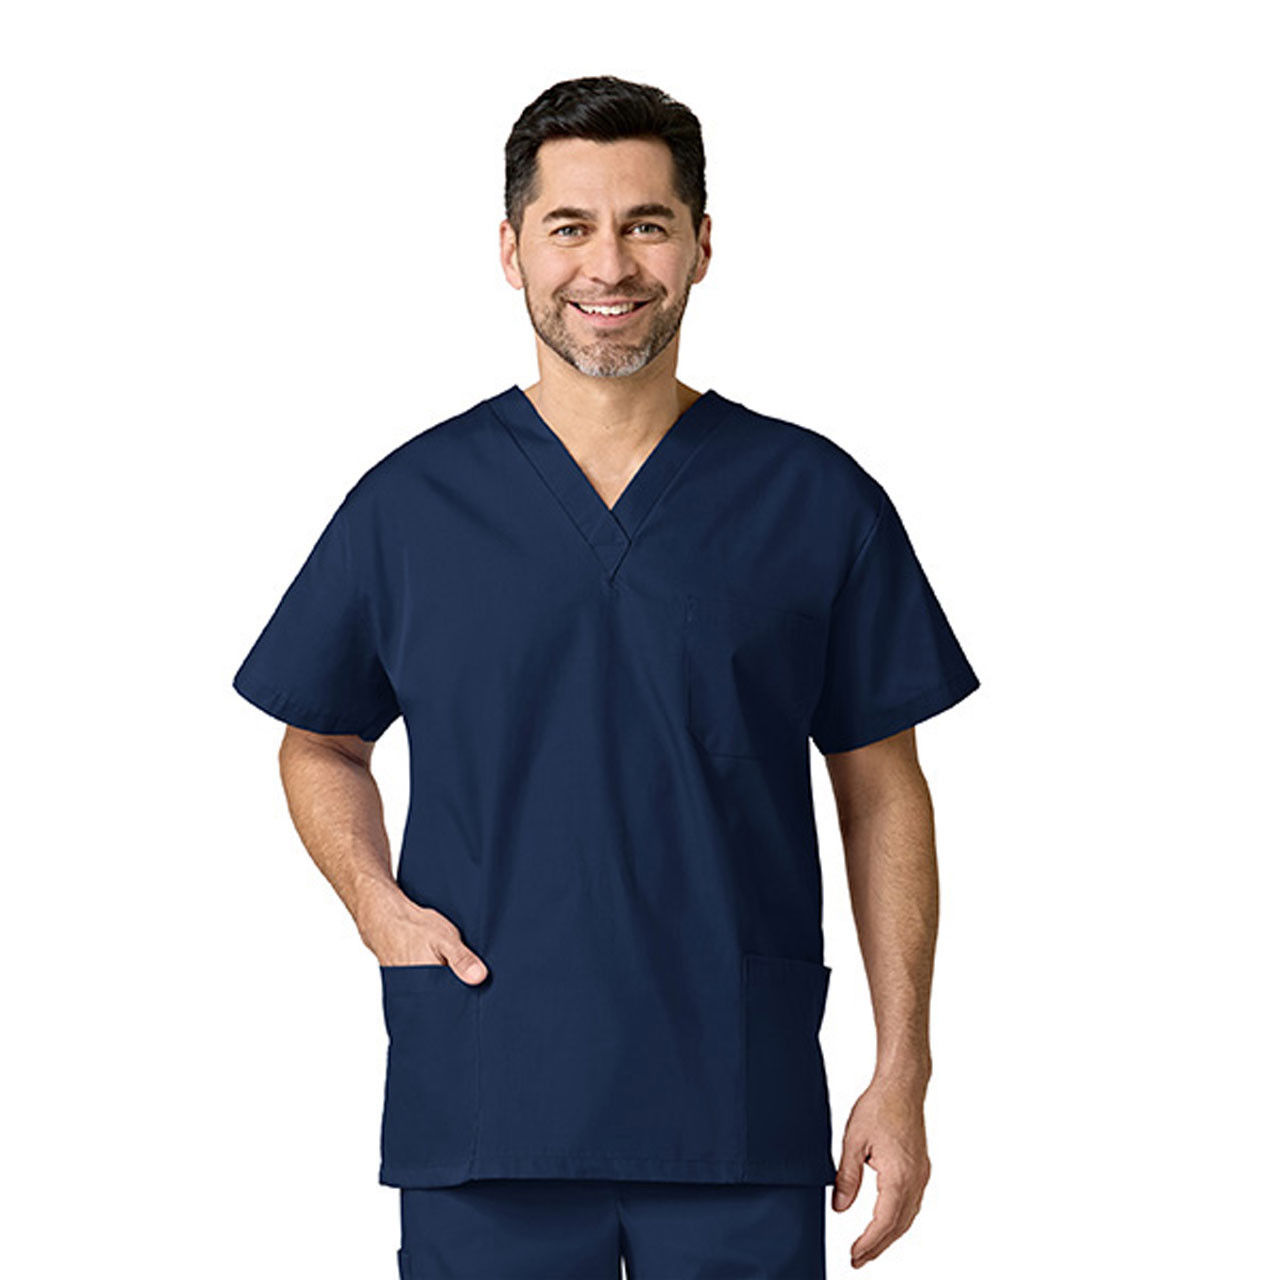 Who can wear these Navy Blue Scrub Tops?